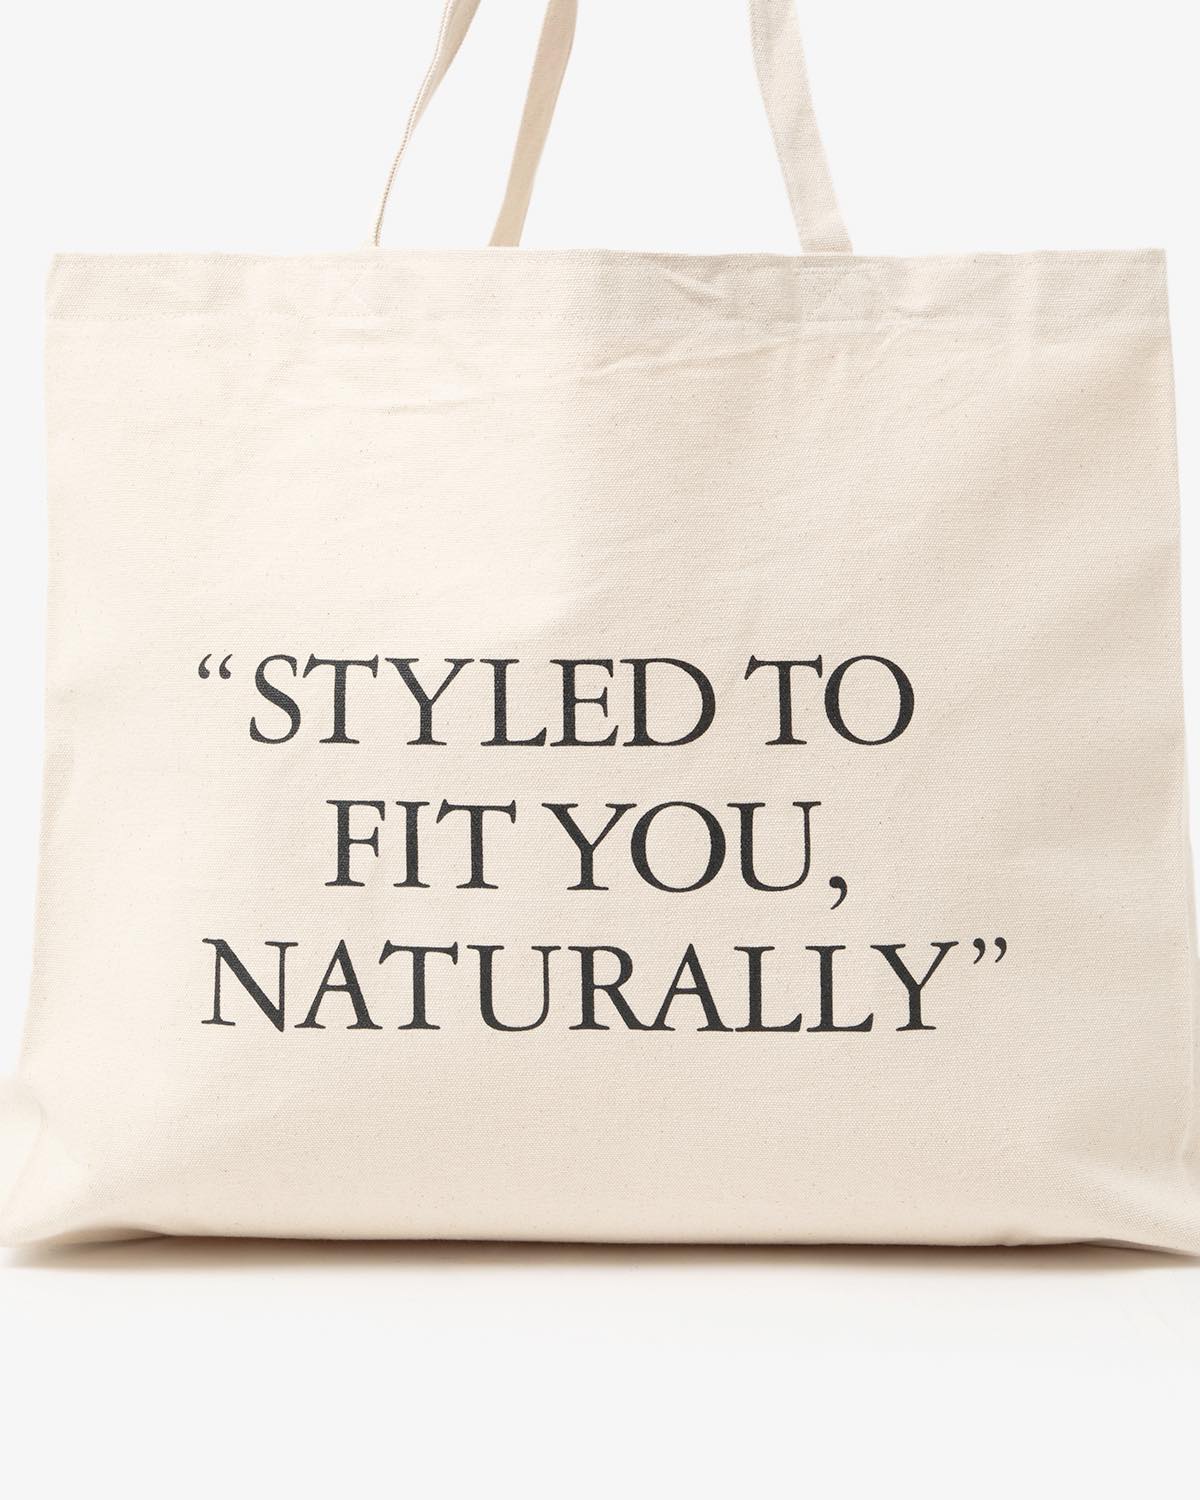 PRINTED GRAPHIC TOTE L "STYLED TO FIT YOU, NATURALLY"